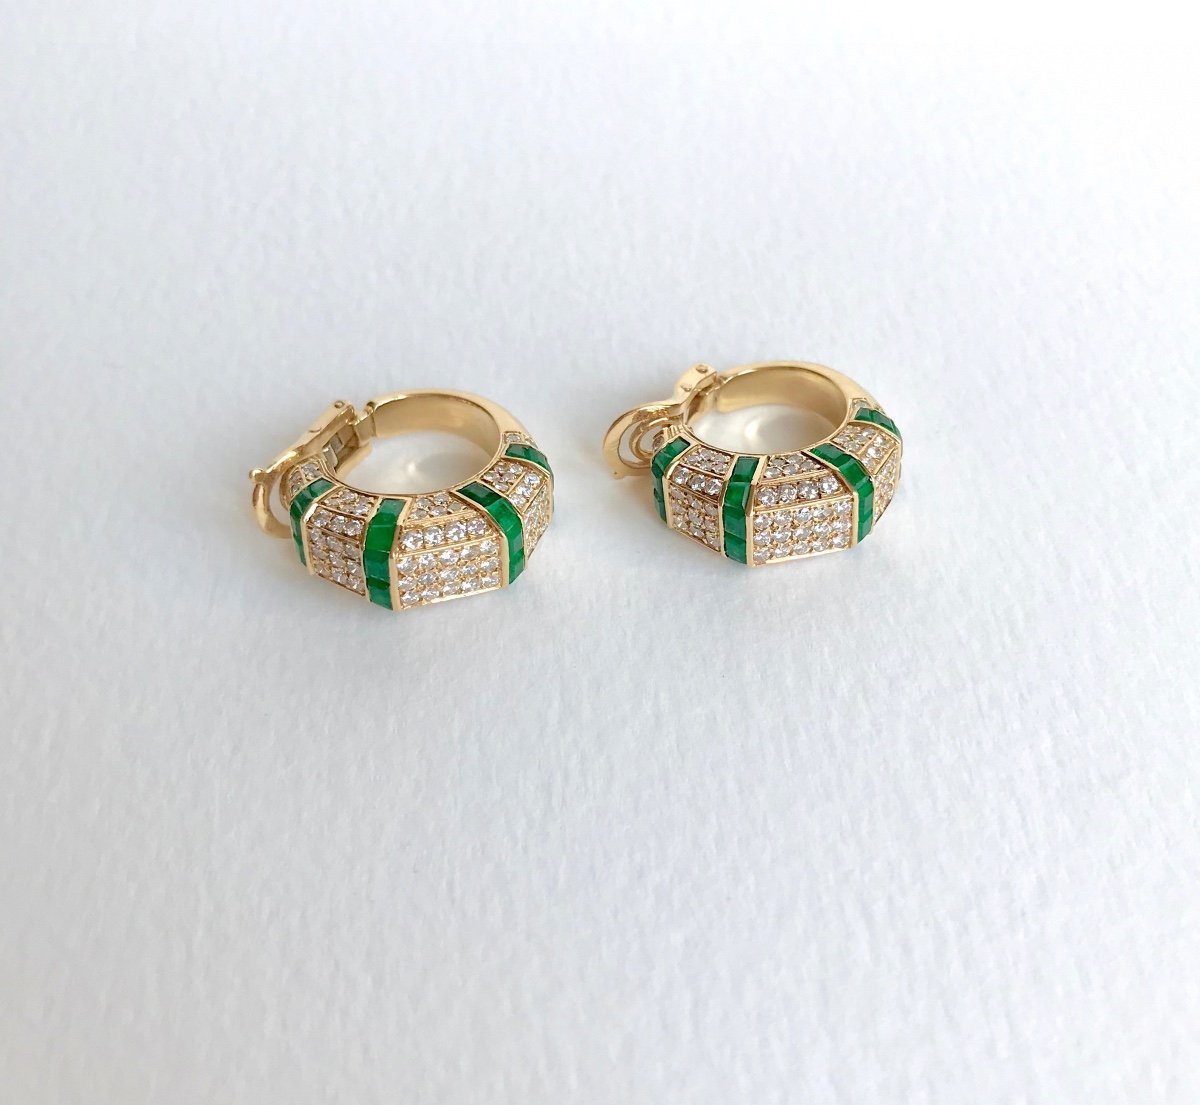 Piaget Earrings In 18 Kt Yellow Gold Diamonds And Emeralds.-photo-2